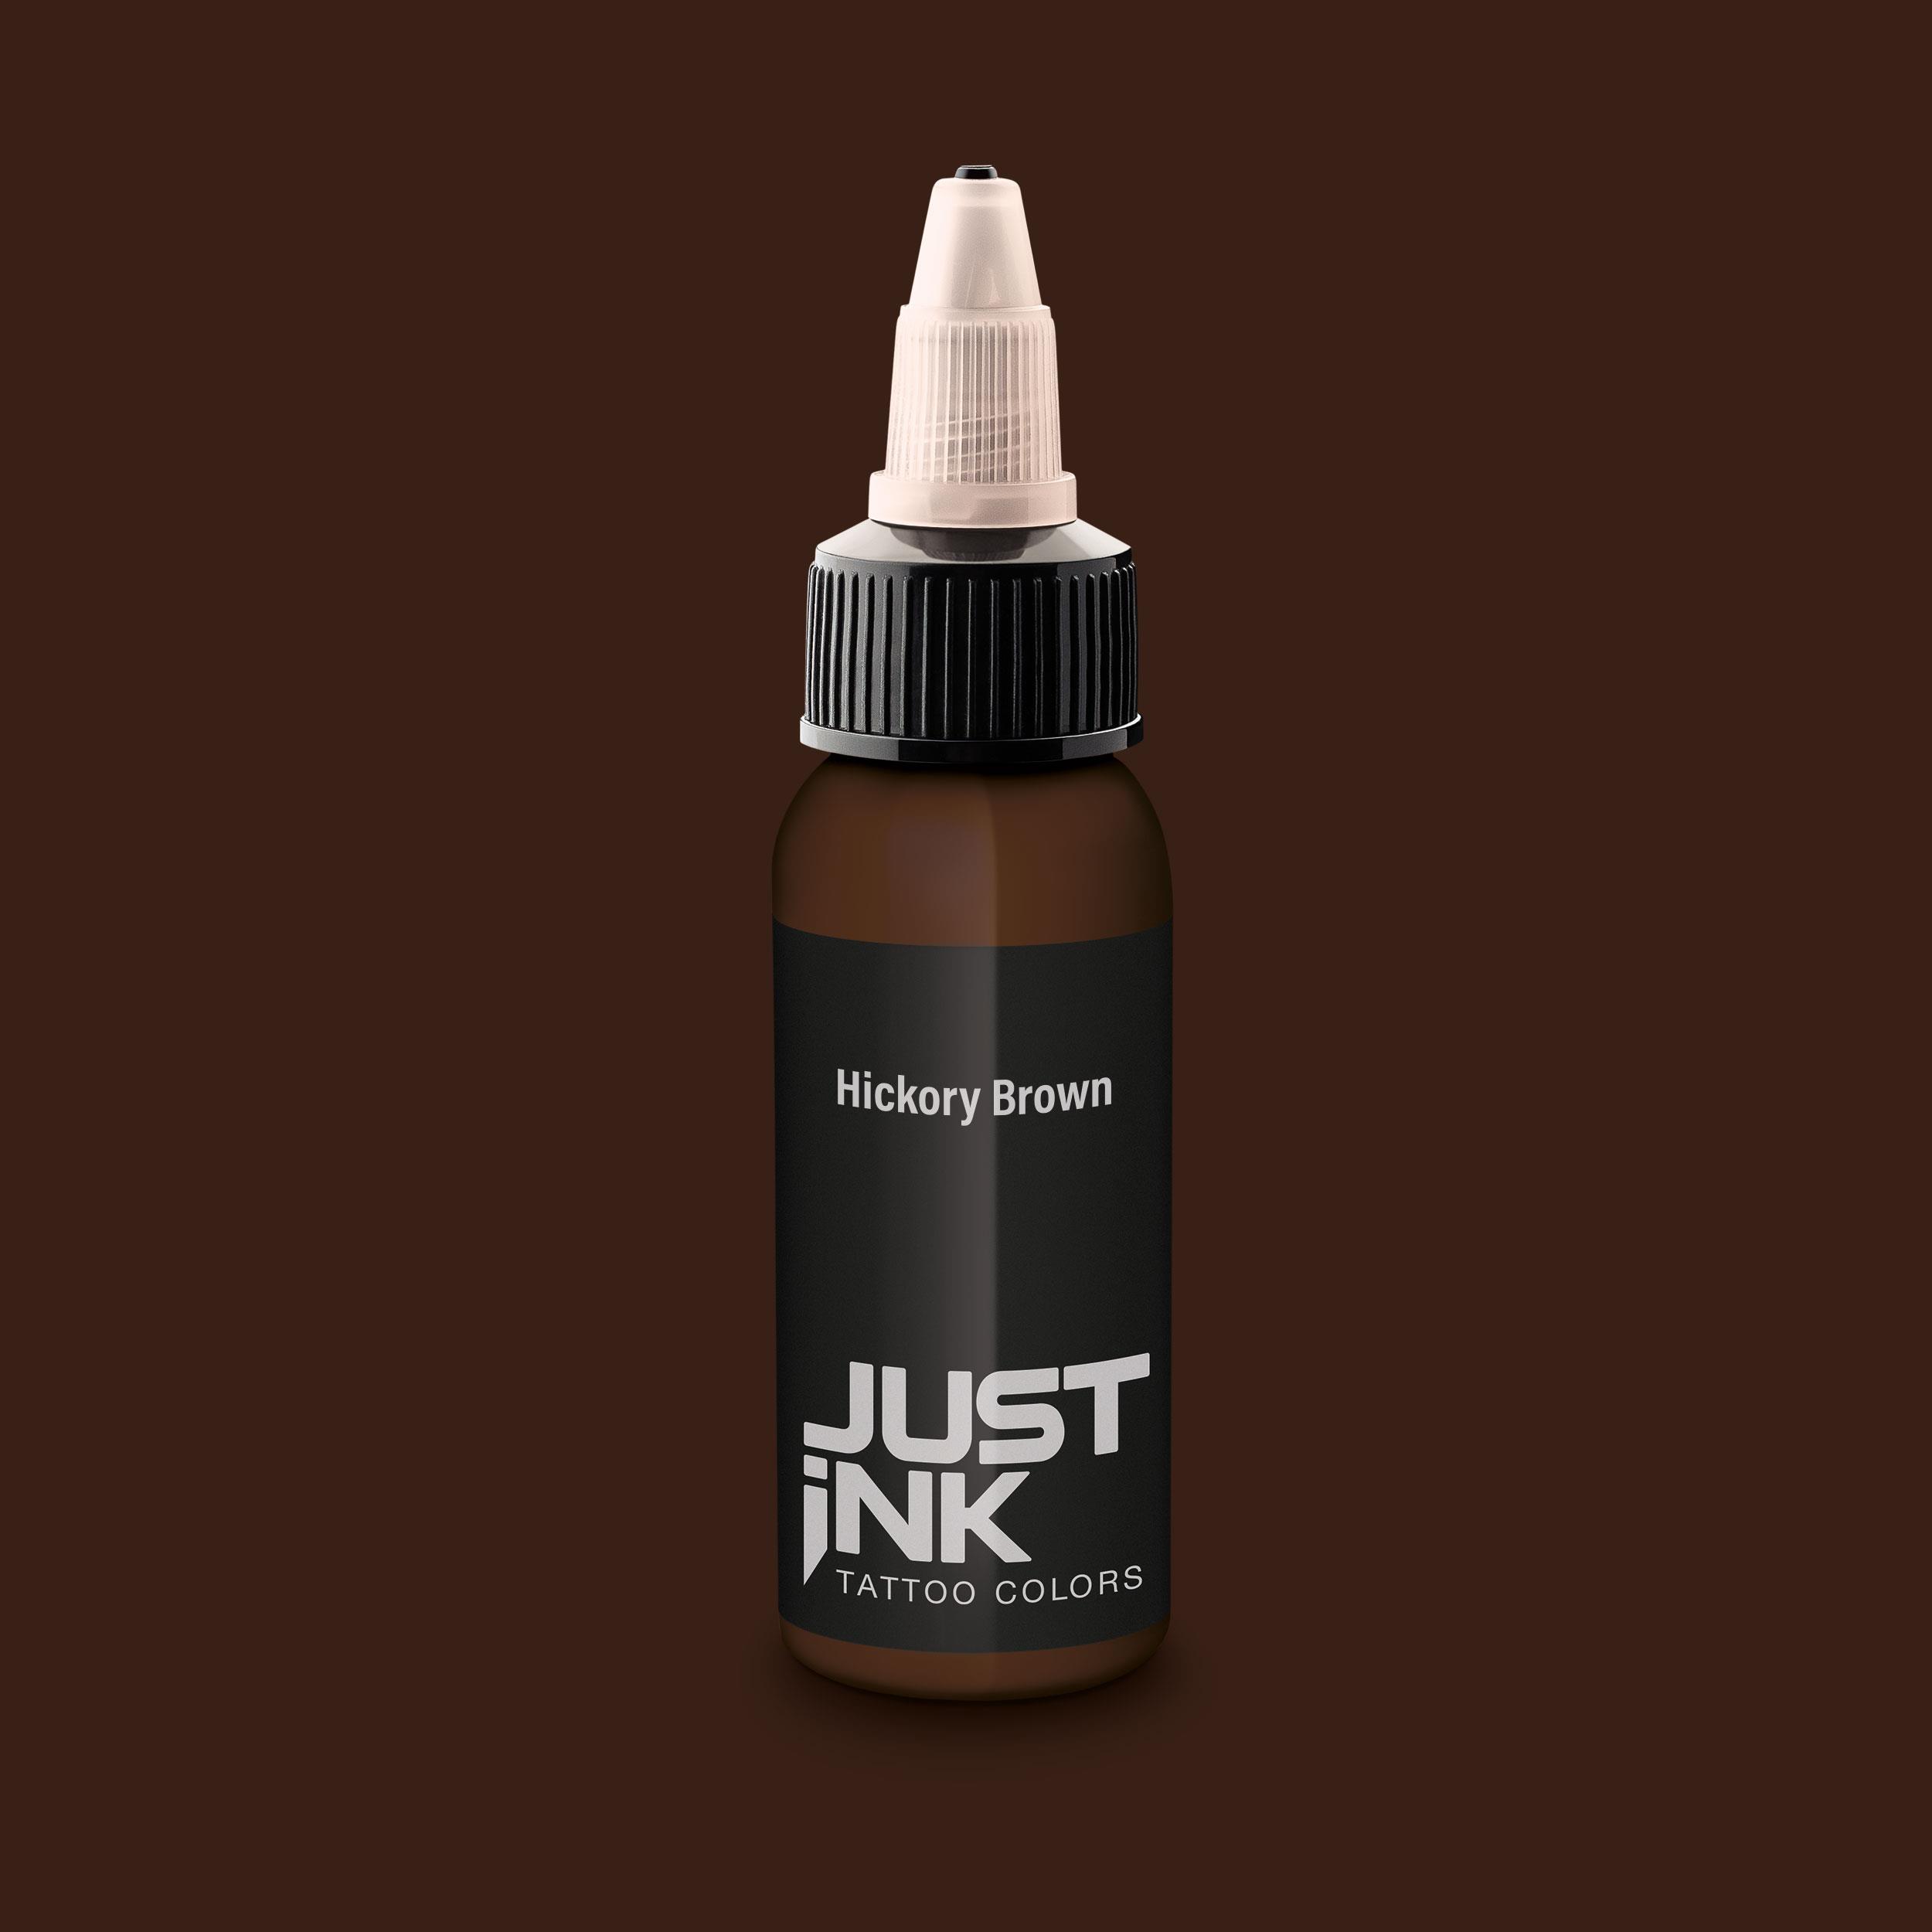 Just Ink - Tattoo Farbe - Hickory Brown - 30 ml